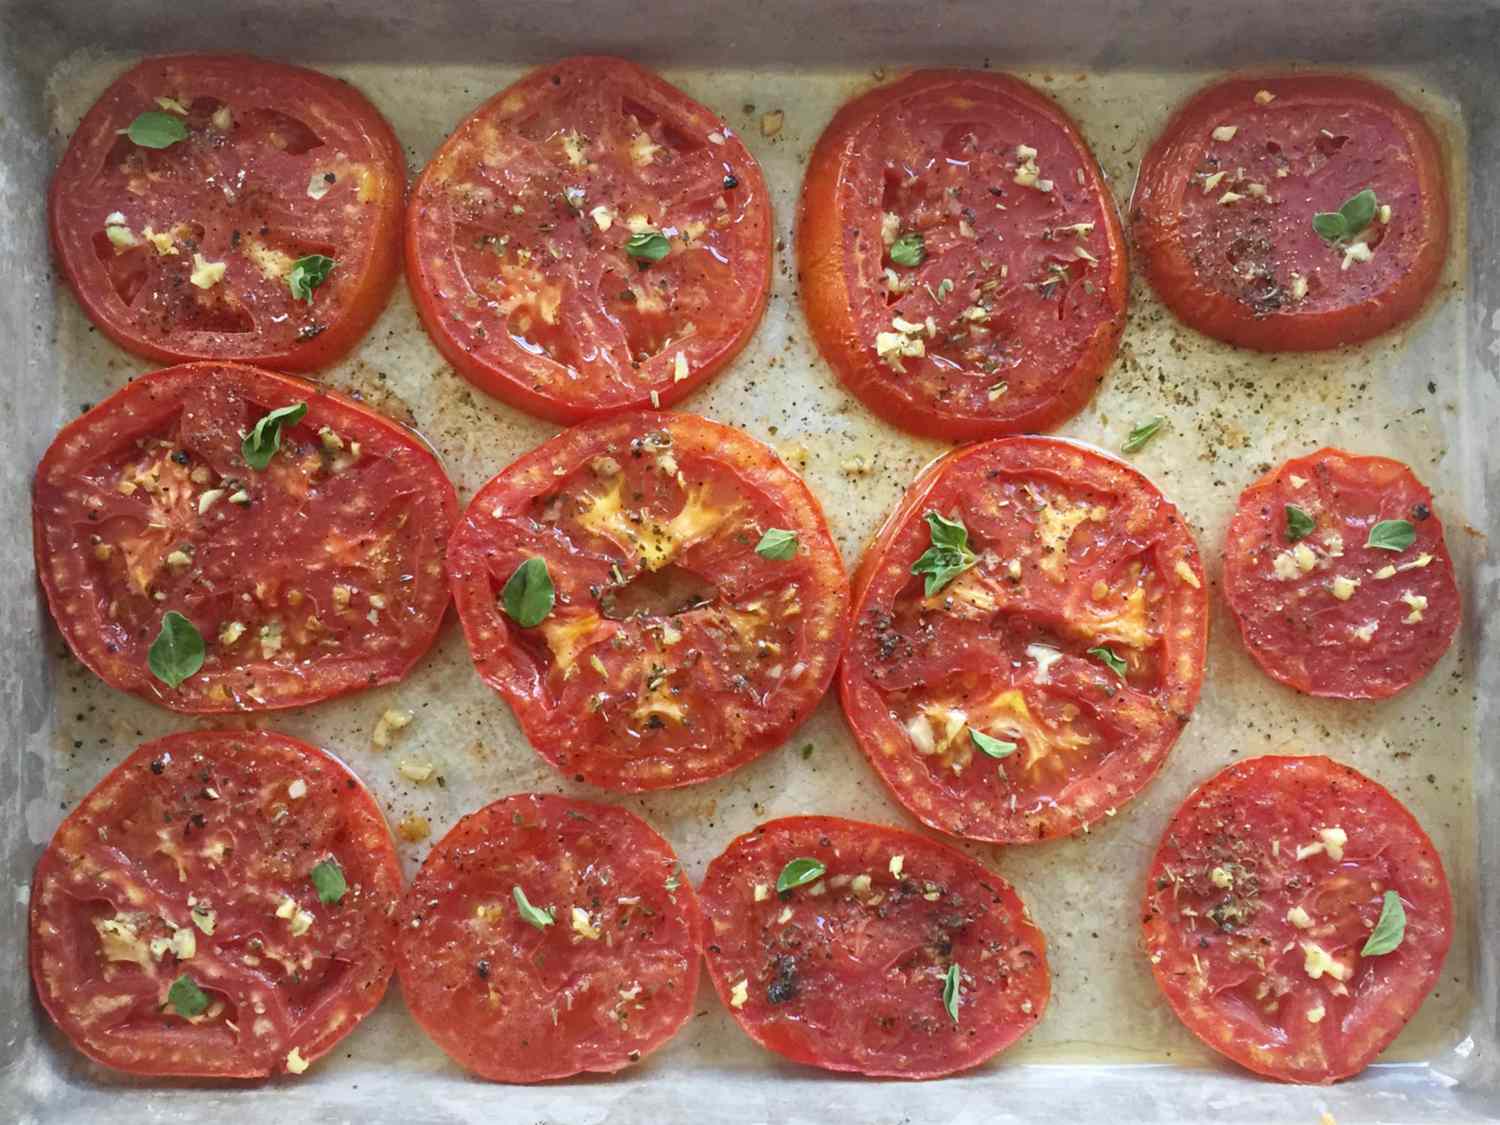 Baked tomato slices on a sheet tray.